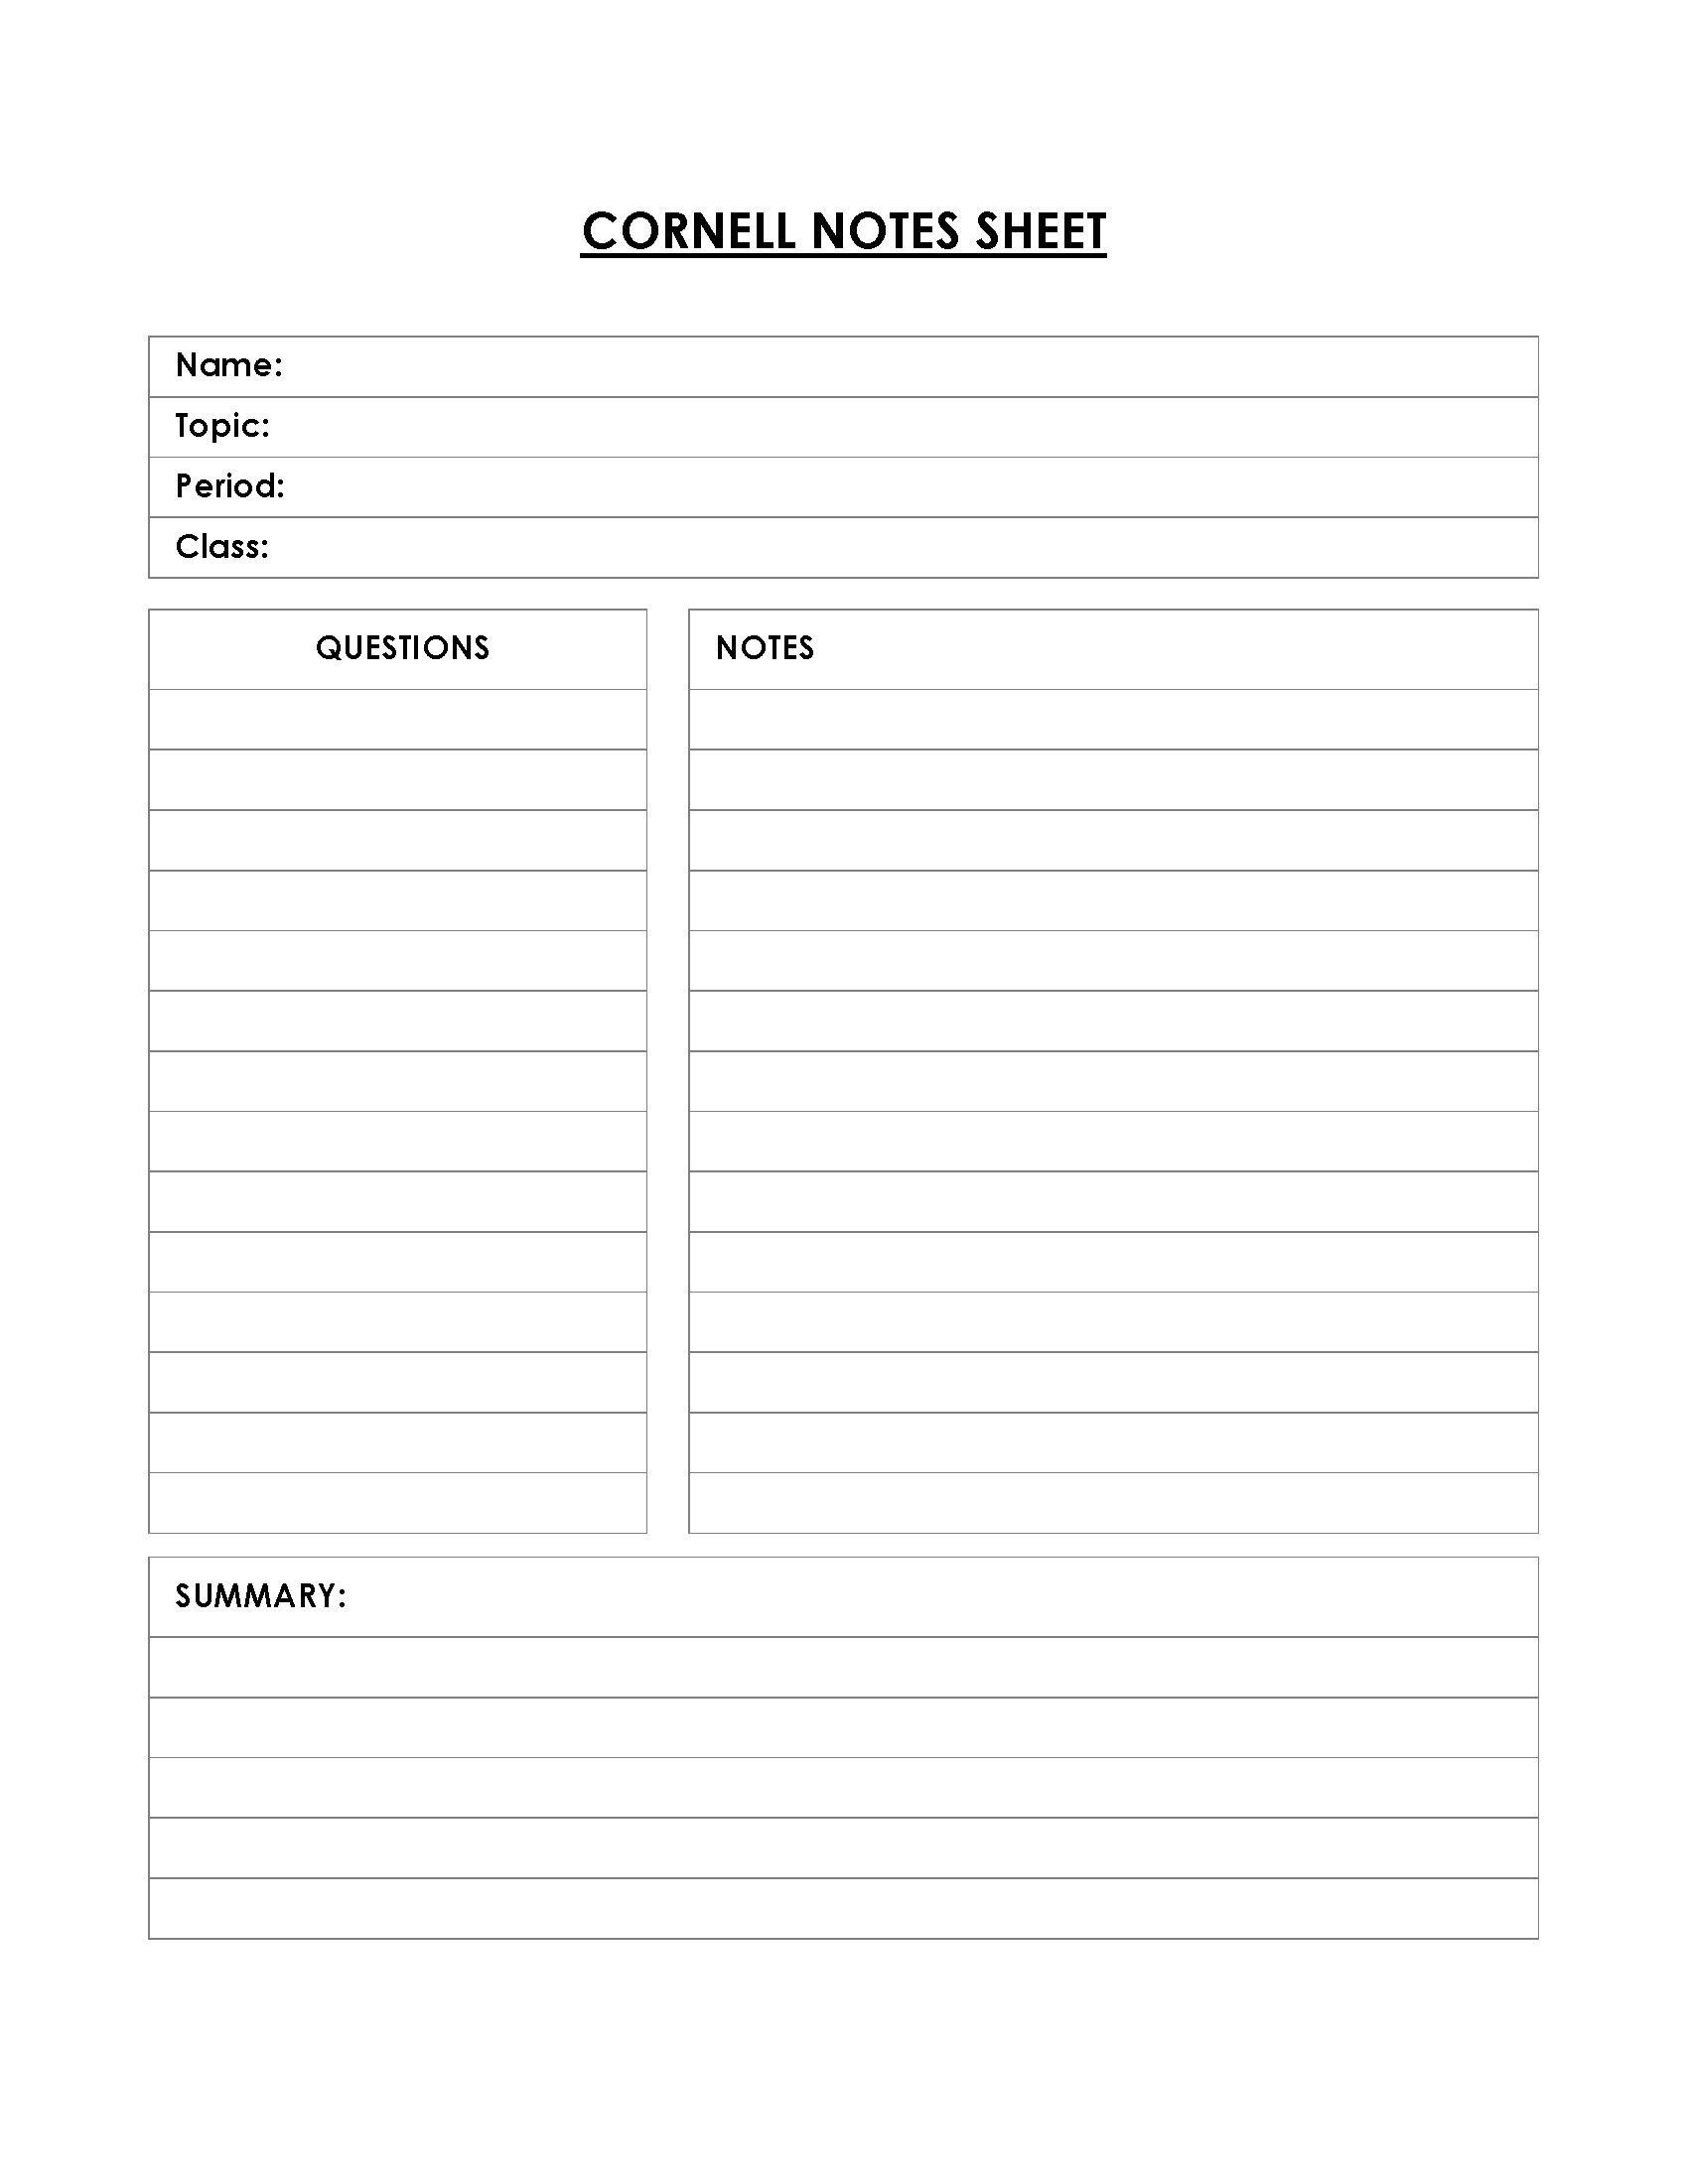 Free Cornell note template in word format